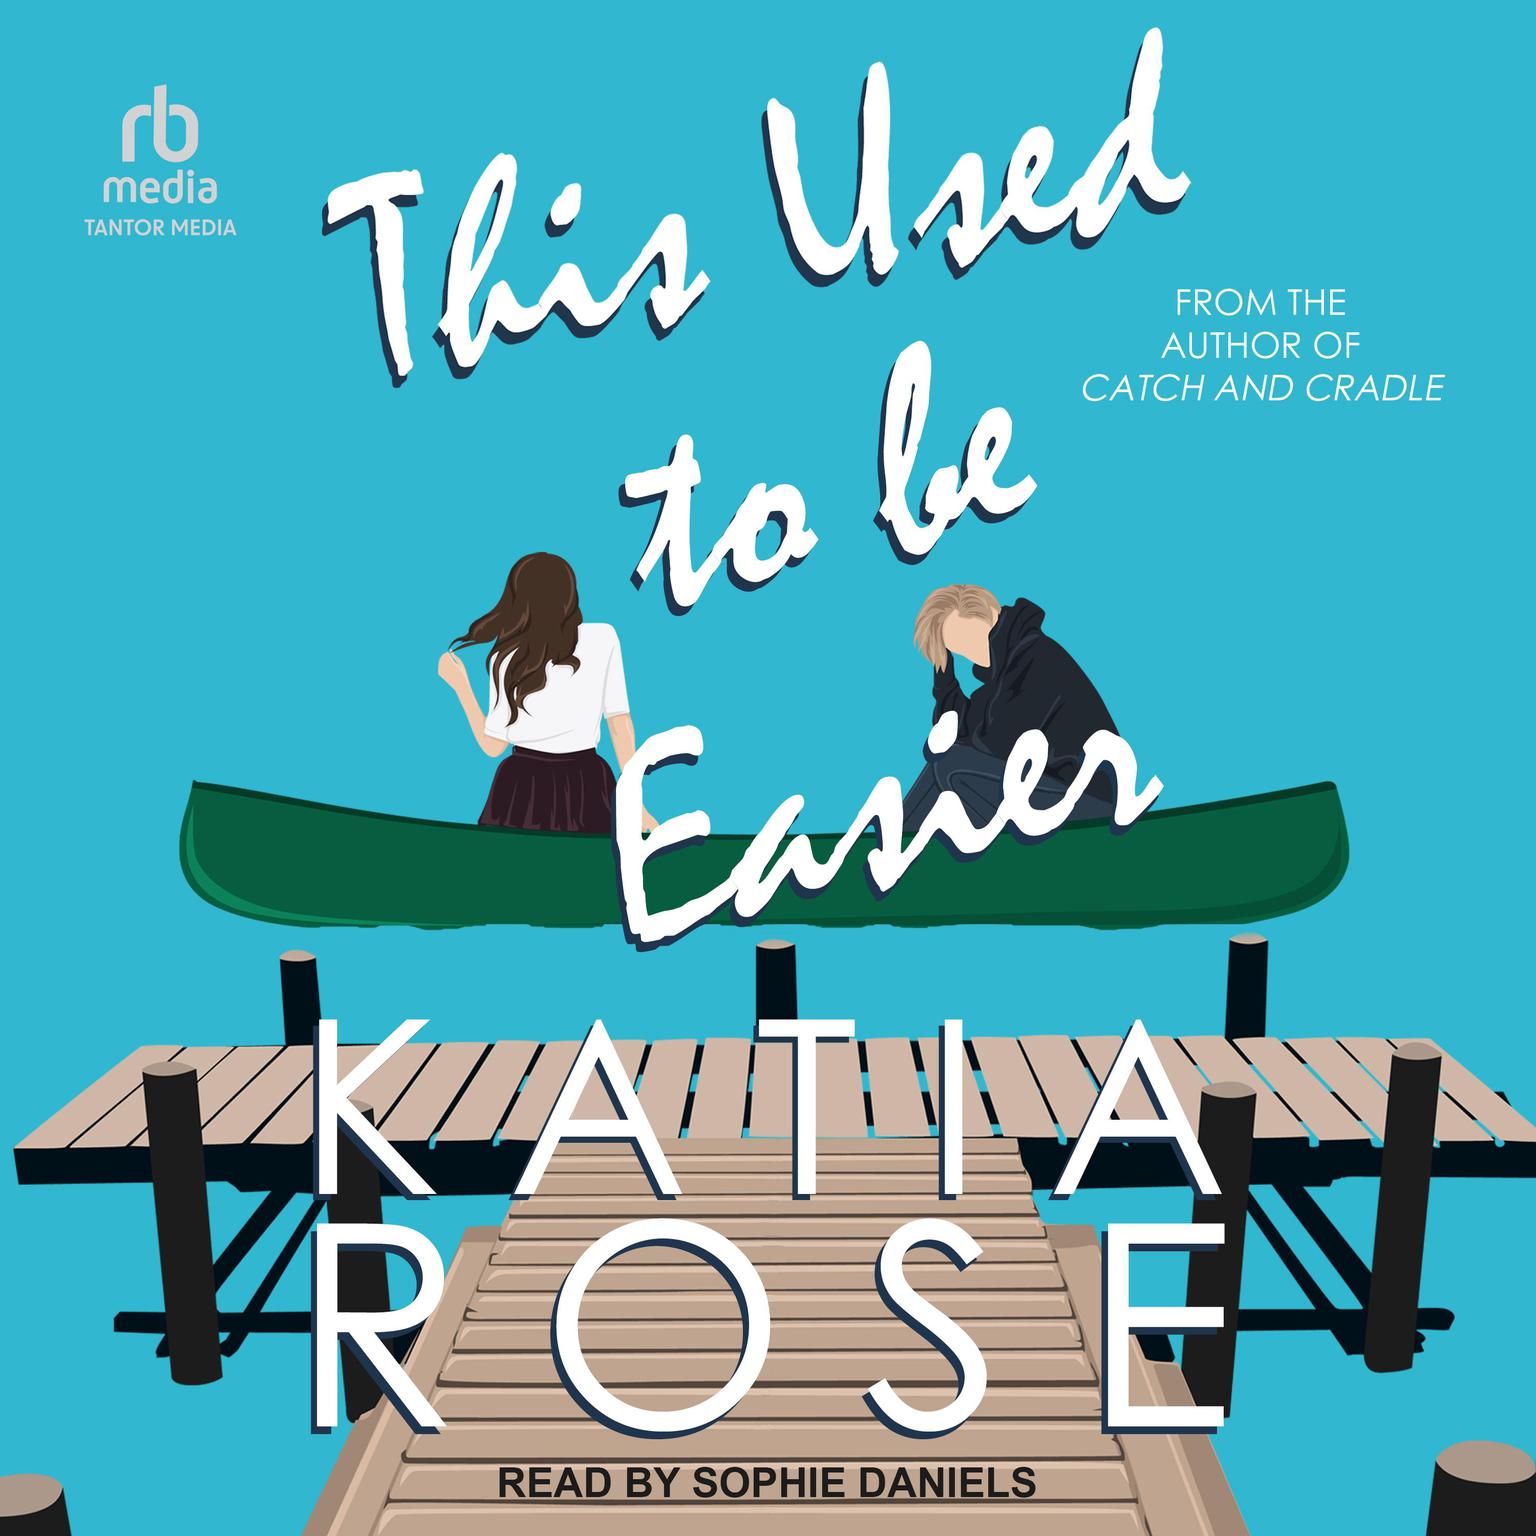 This Used to Be Easier Audiobook, by Katia Rose